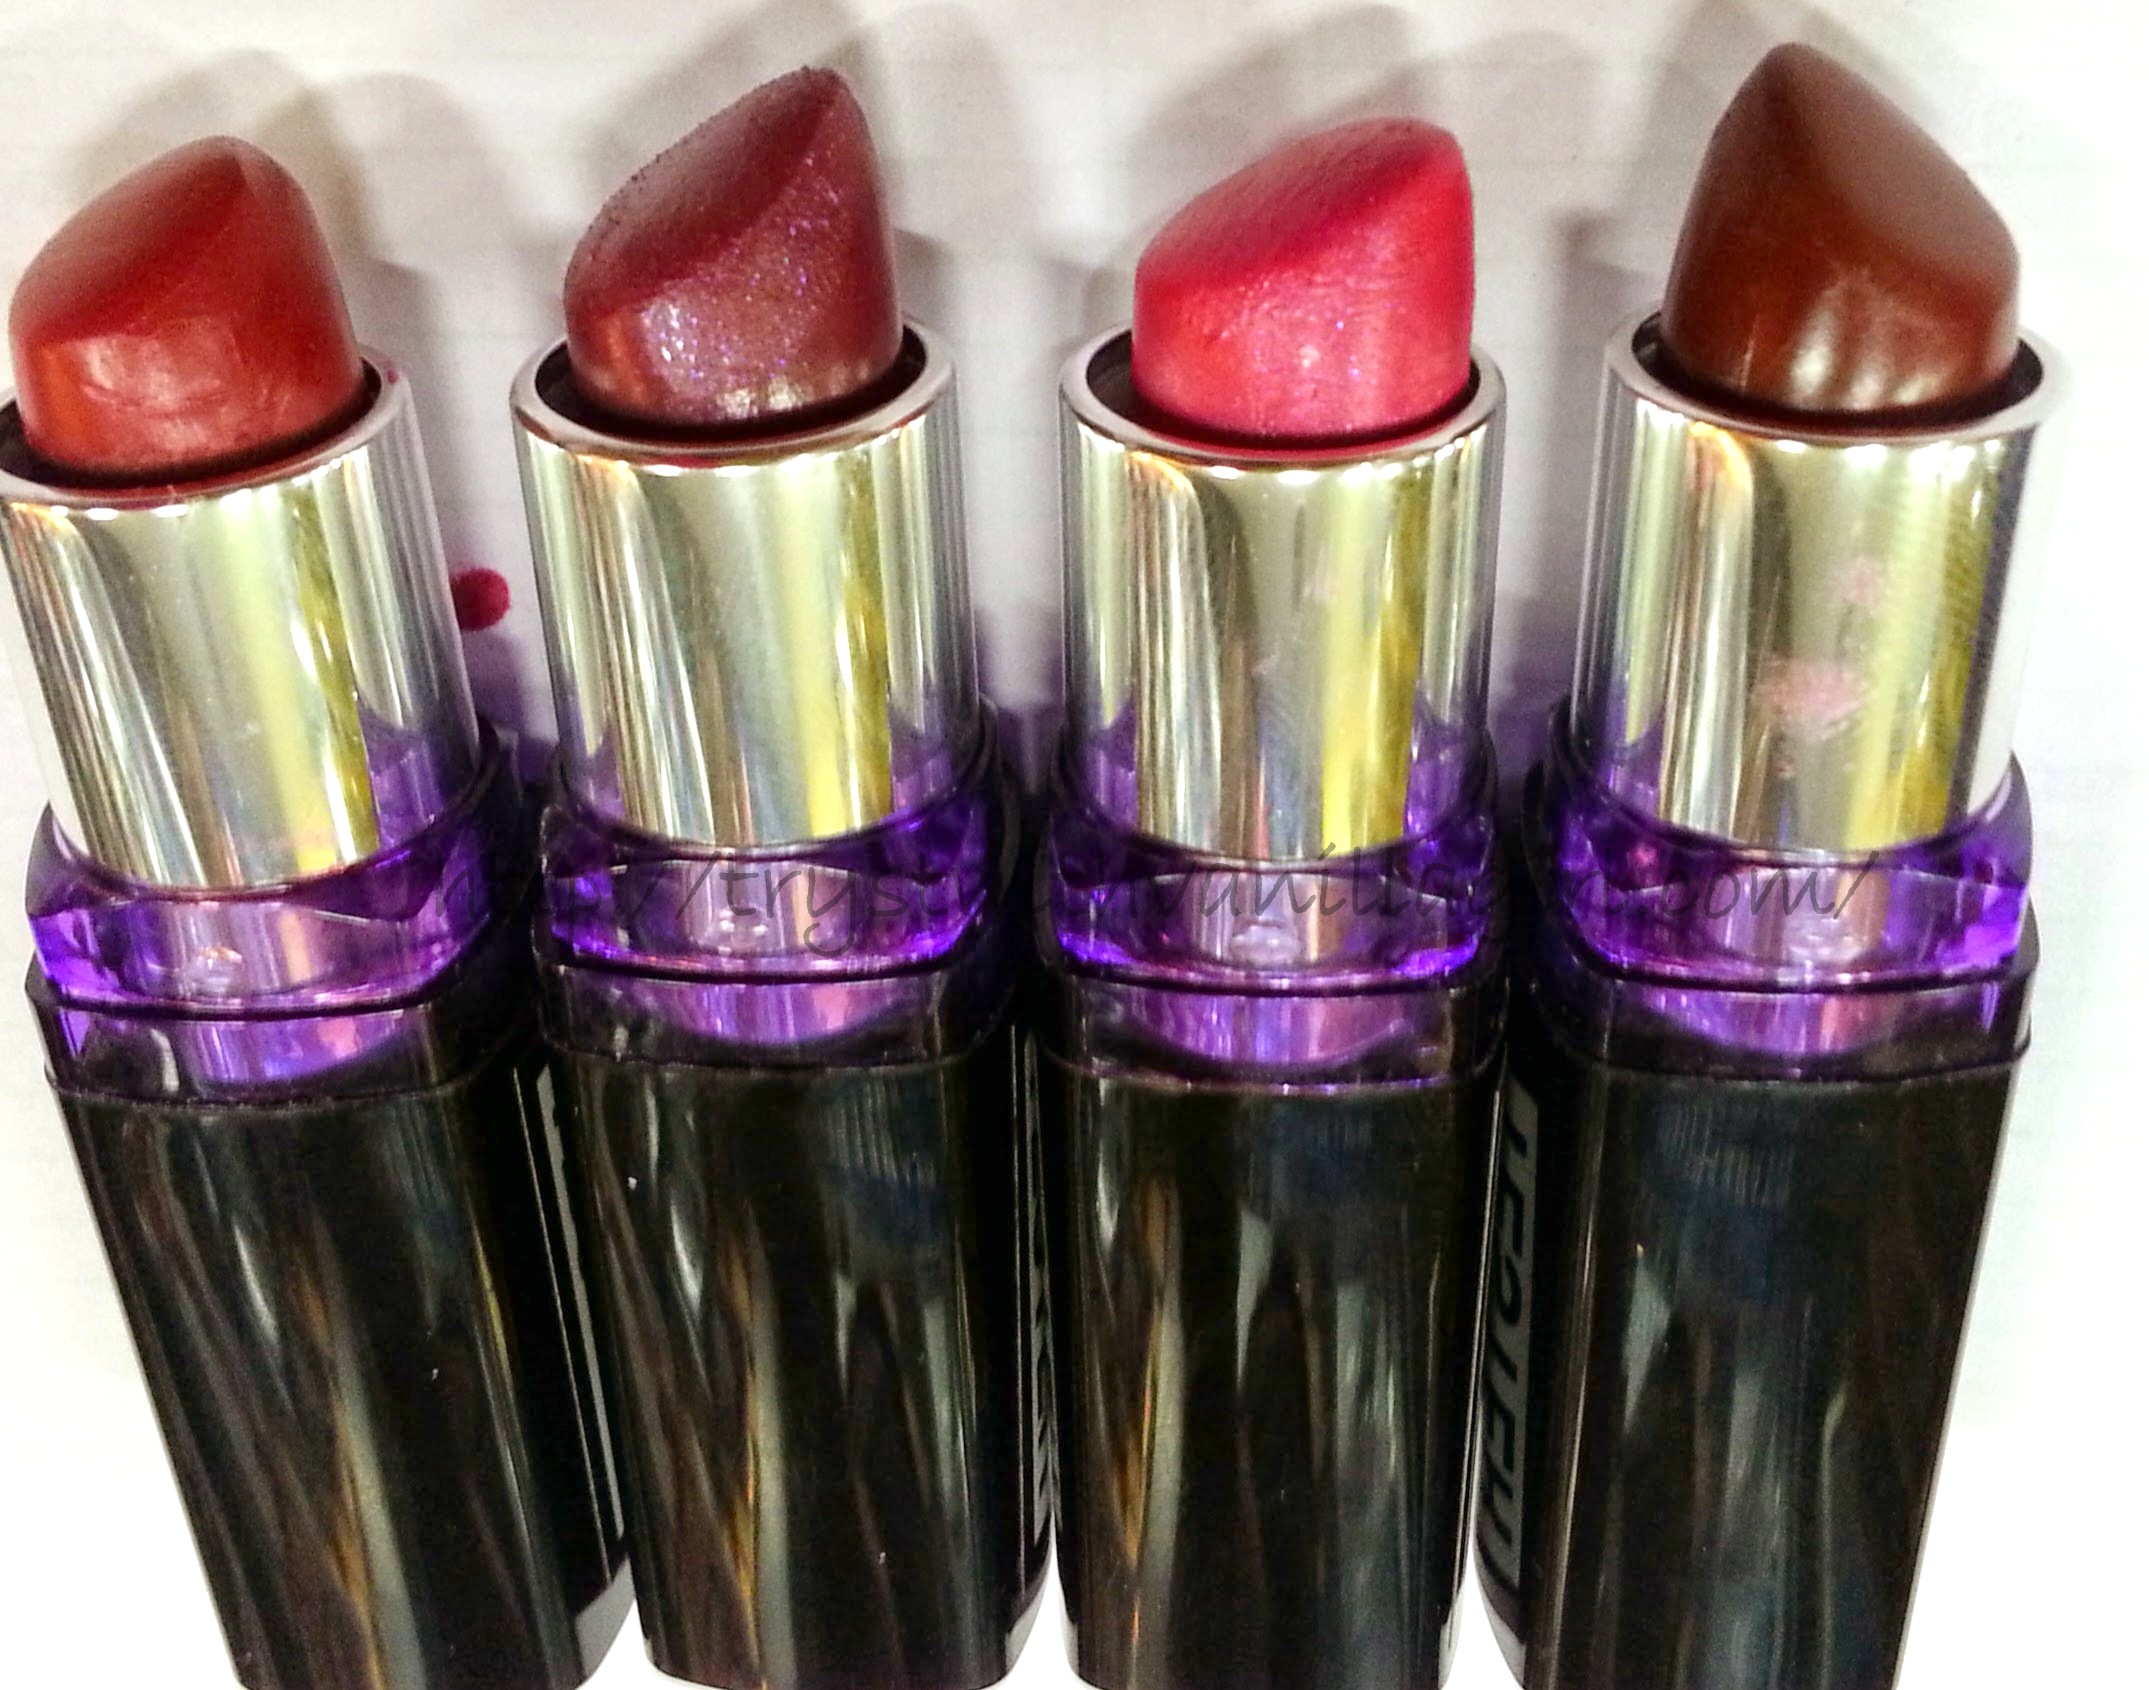 MAYBELLINE COLOR SHOW LIPSTICKS SWATCHES